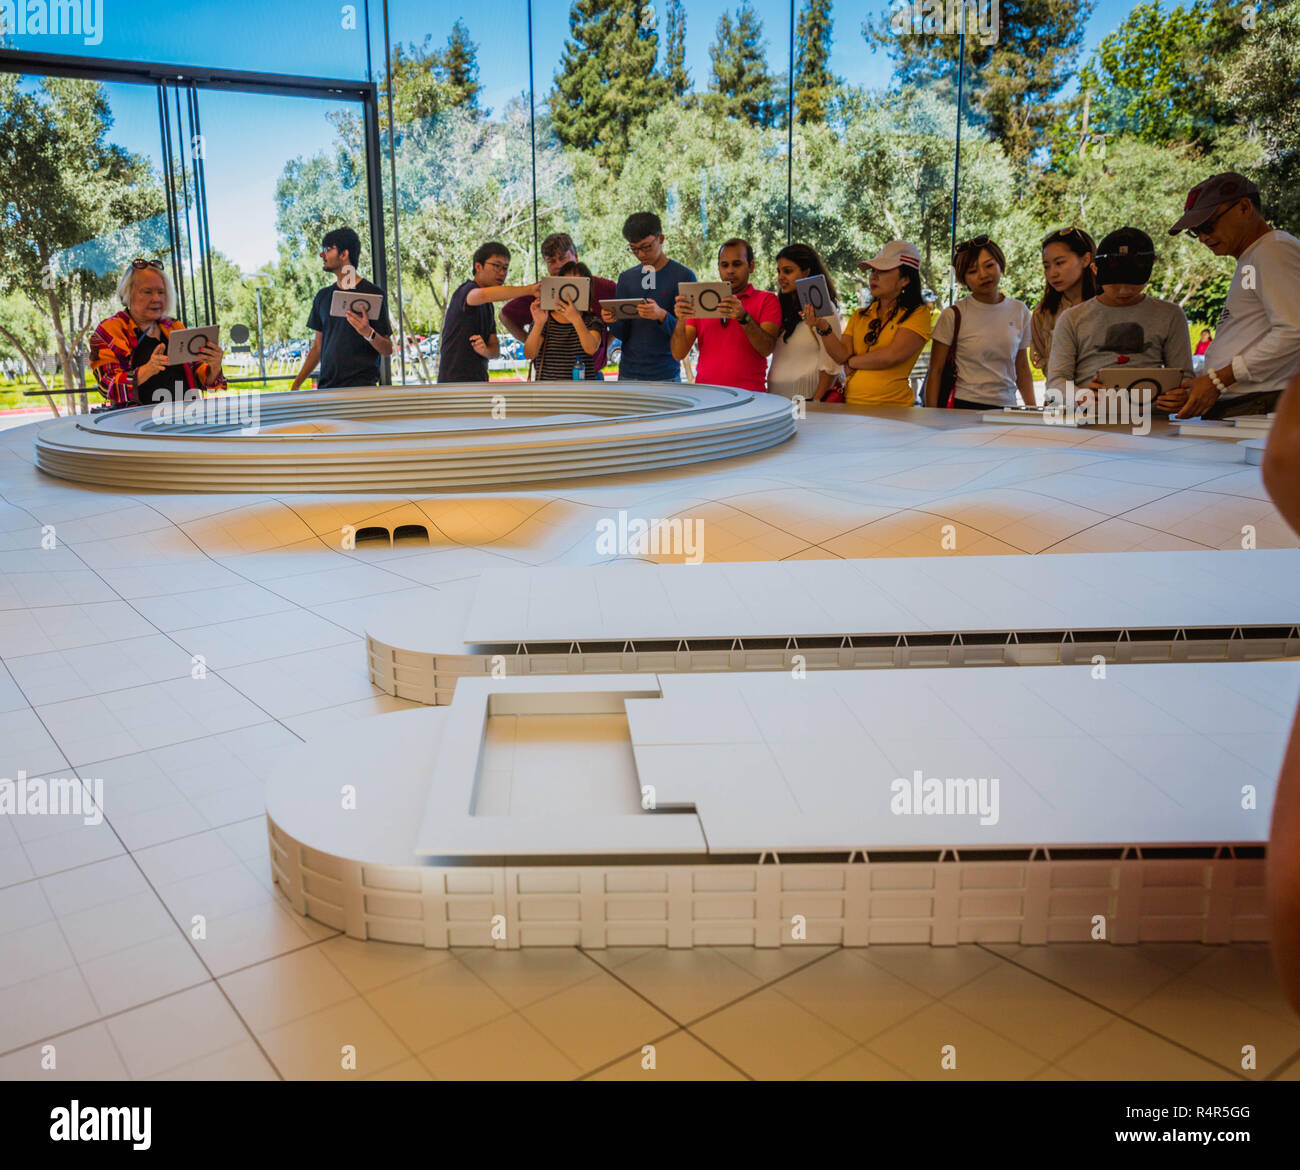 Apple Visitor Center, 1 Apple Park Way, San Jose, California, United States (USA) - August 5, 2018: Guest customers are interested of Apple products a Stock Photo